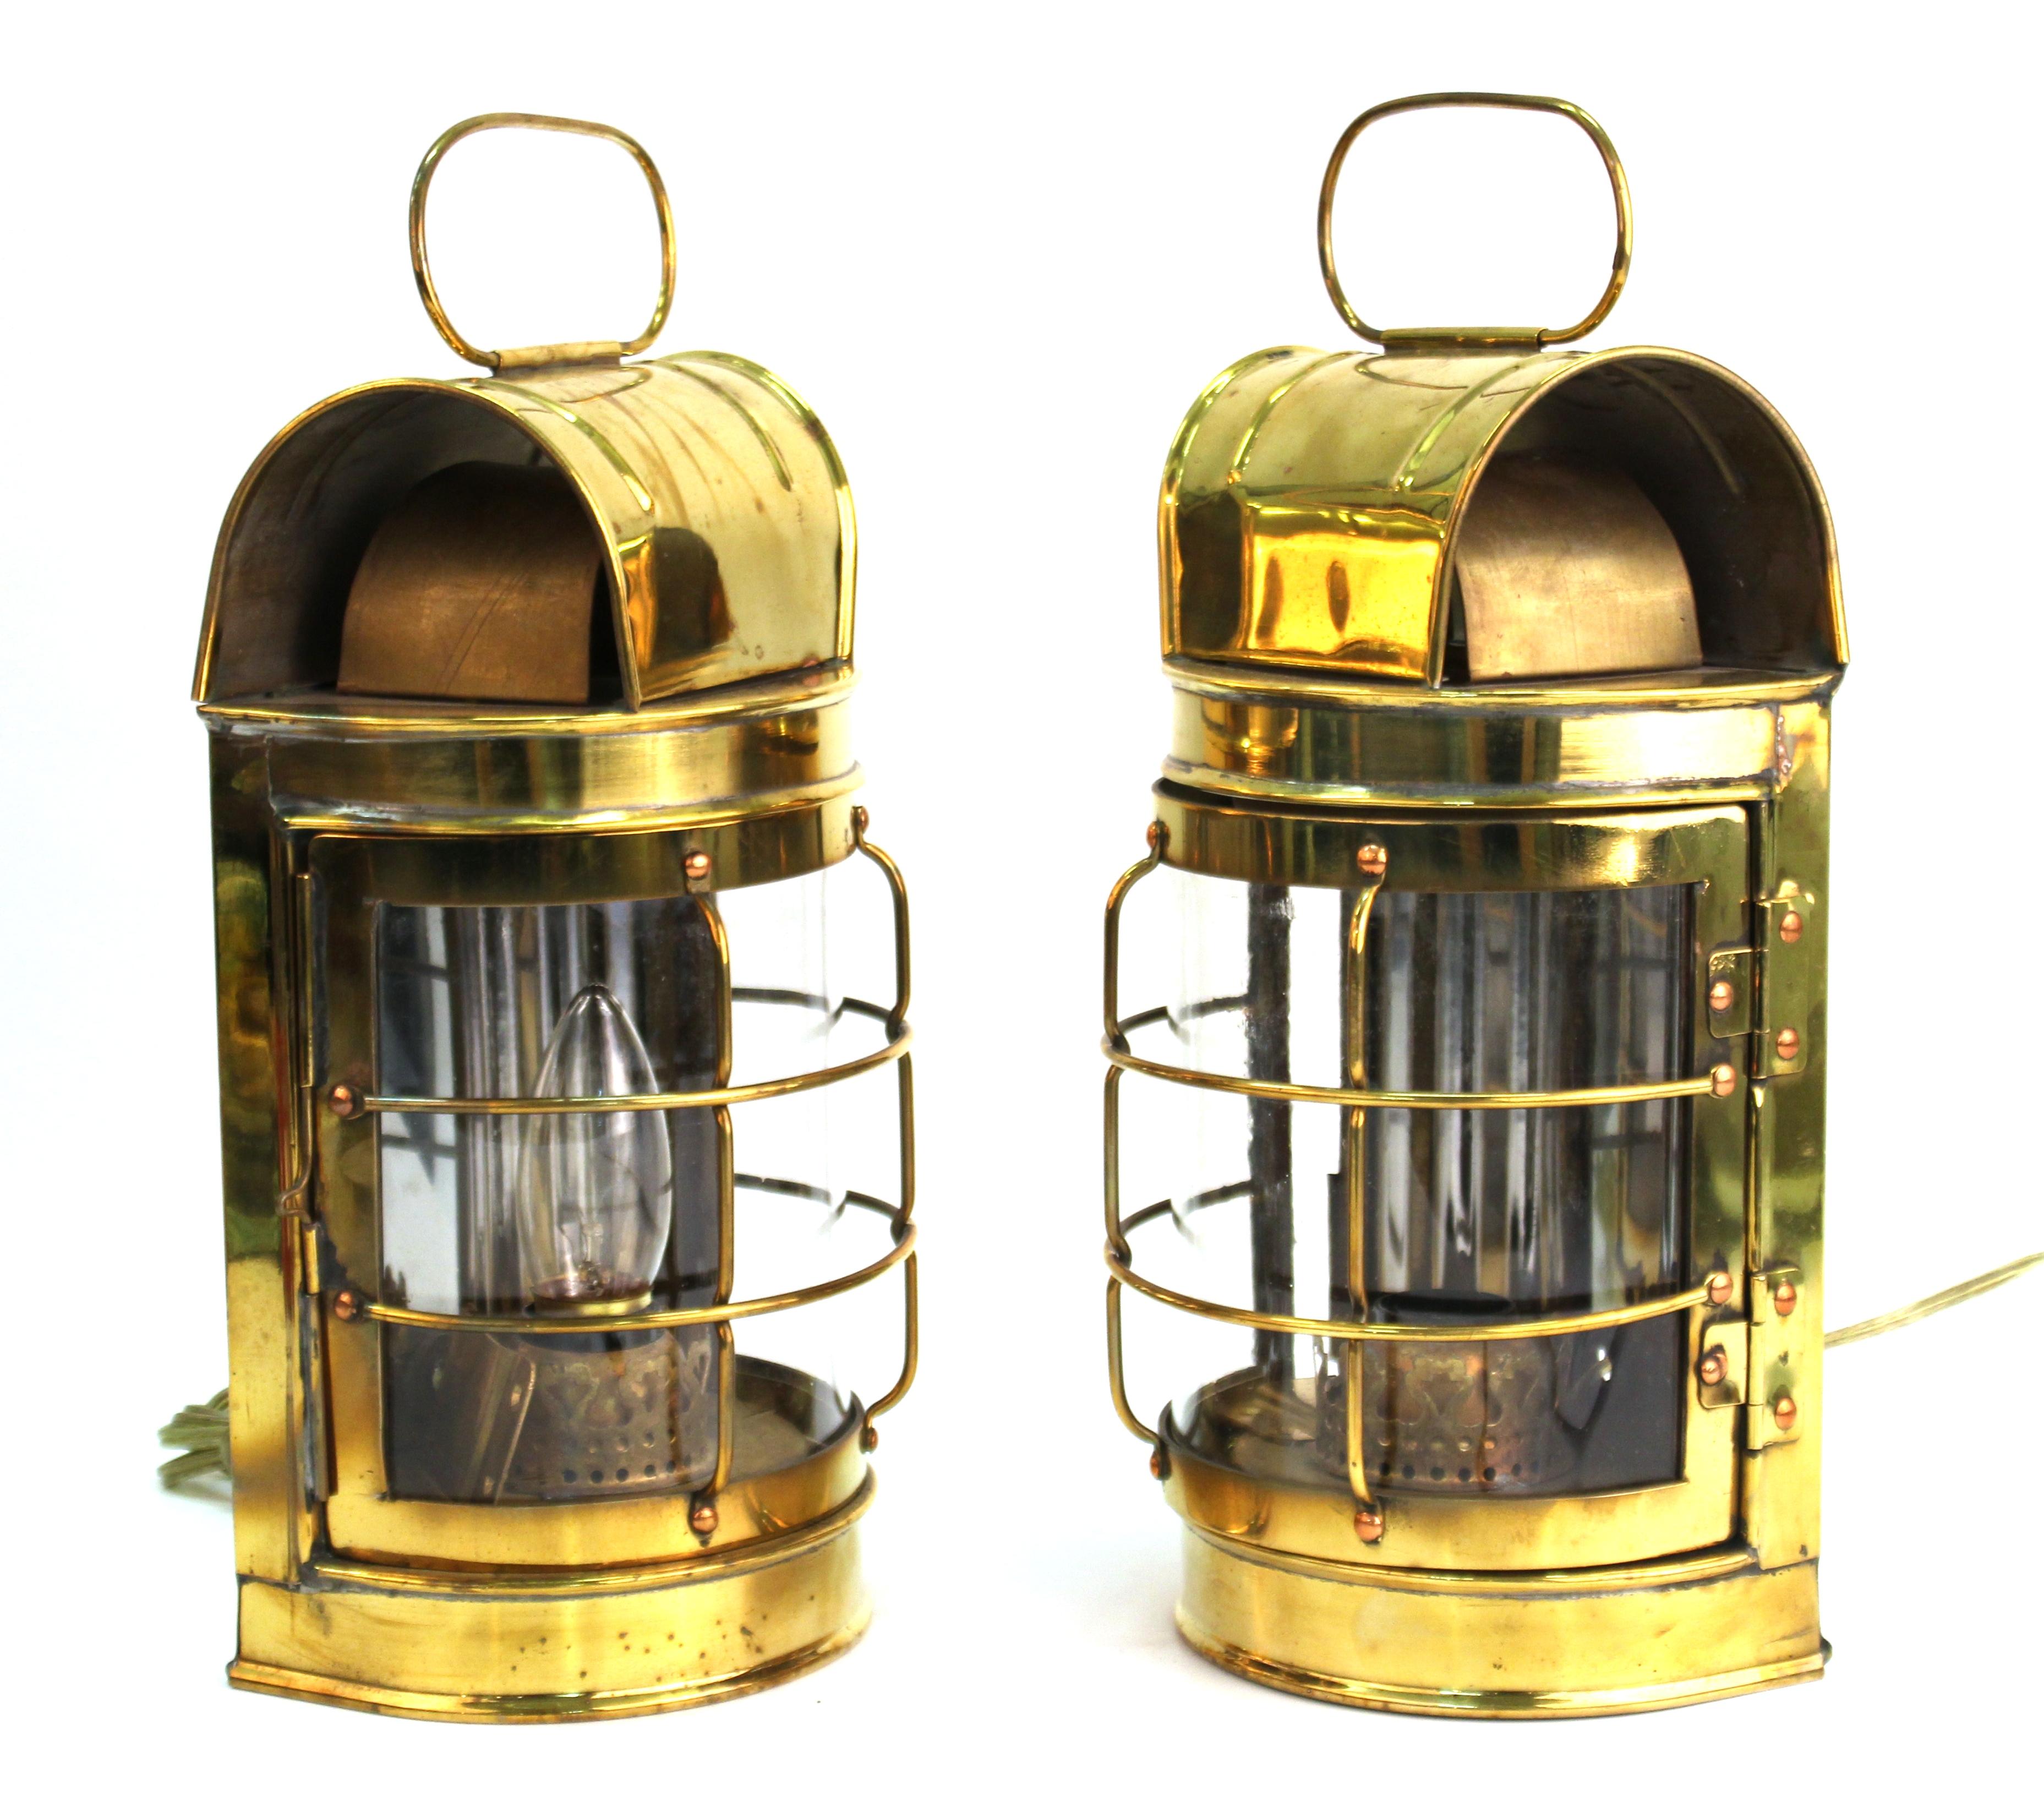 Mid-Century Modern pair of wall sconces in the shape of brass lanterns. The pair was made during the 1970's and is in great vintage condition with very minor age-appropriate wear.